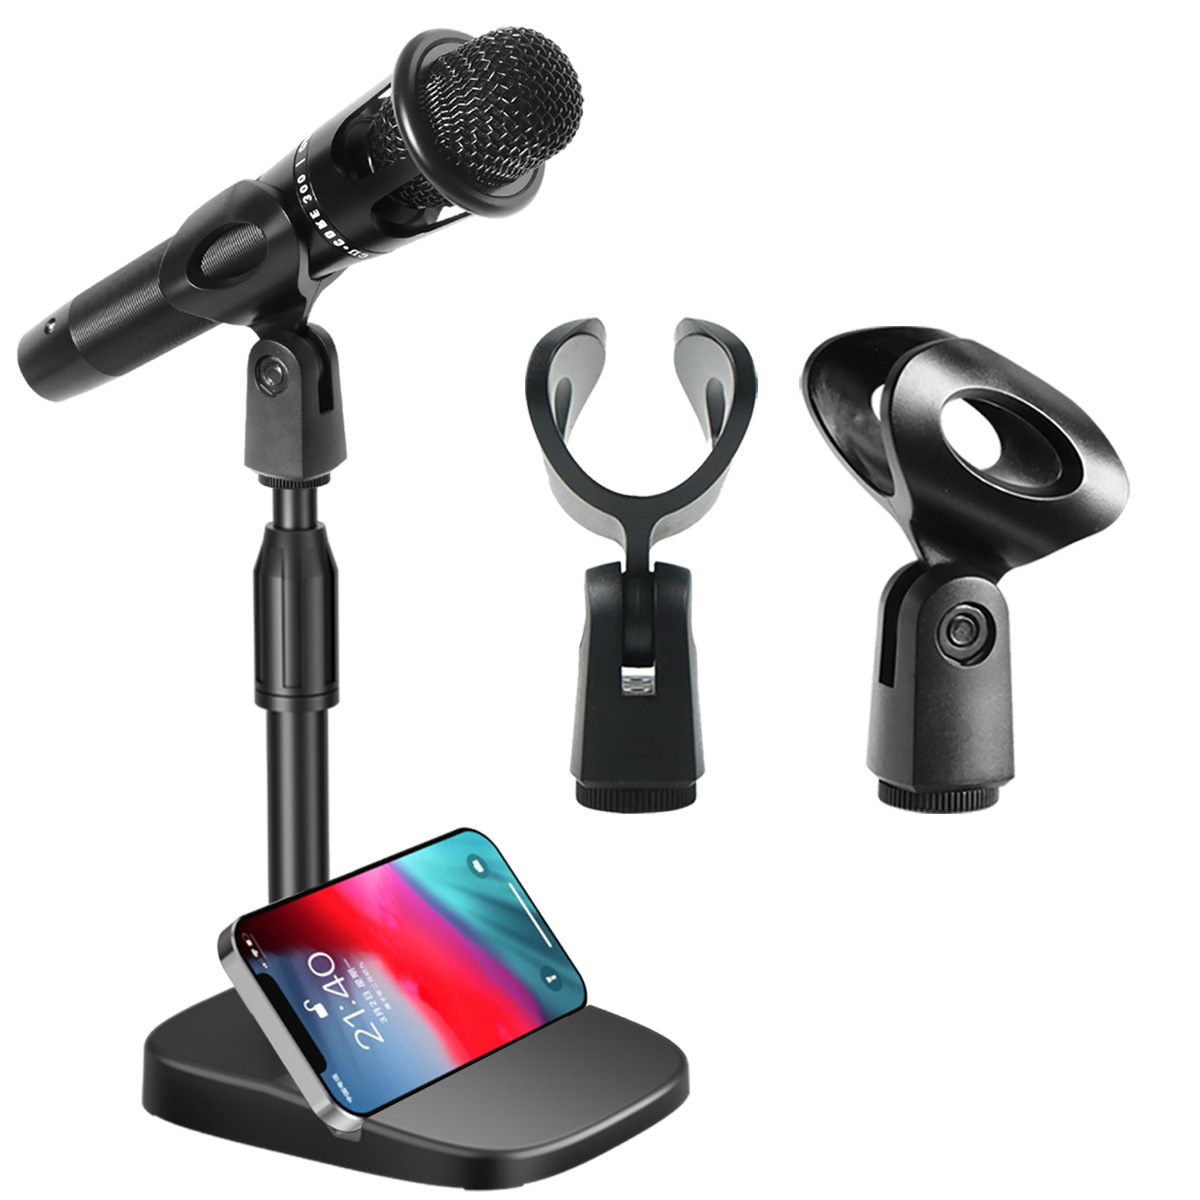 E300 condenser microphone clip wired and wireless microphone clip U-shaped clip professional microphone clip with multi-function conversion cap